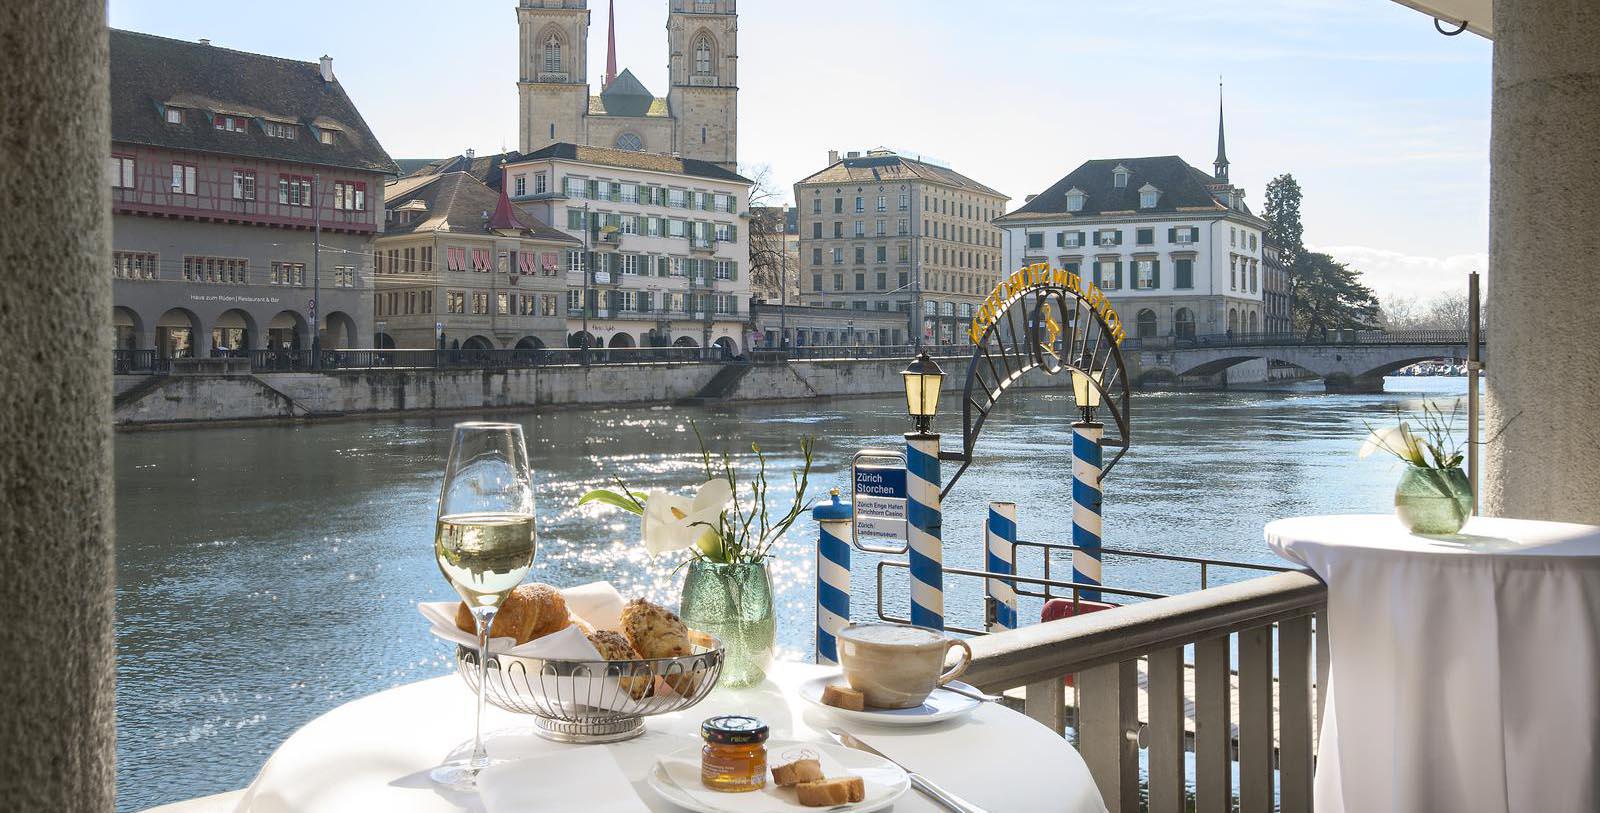 Explore the iconic Grossmünster nearby.